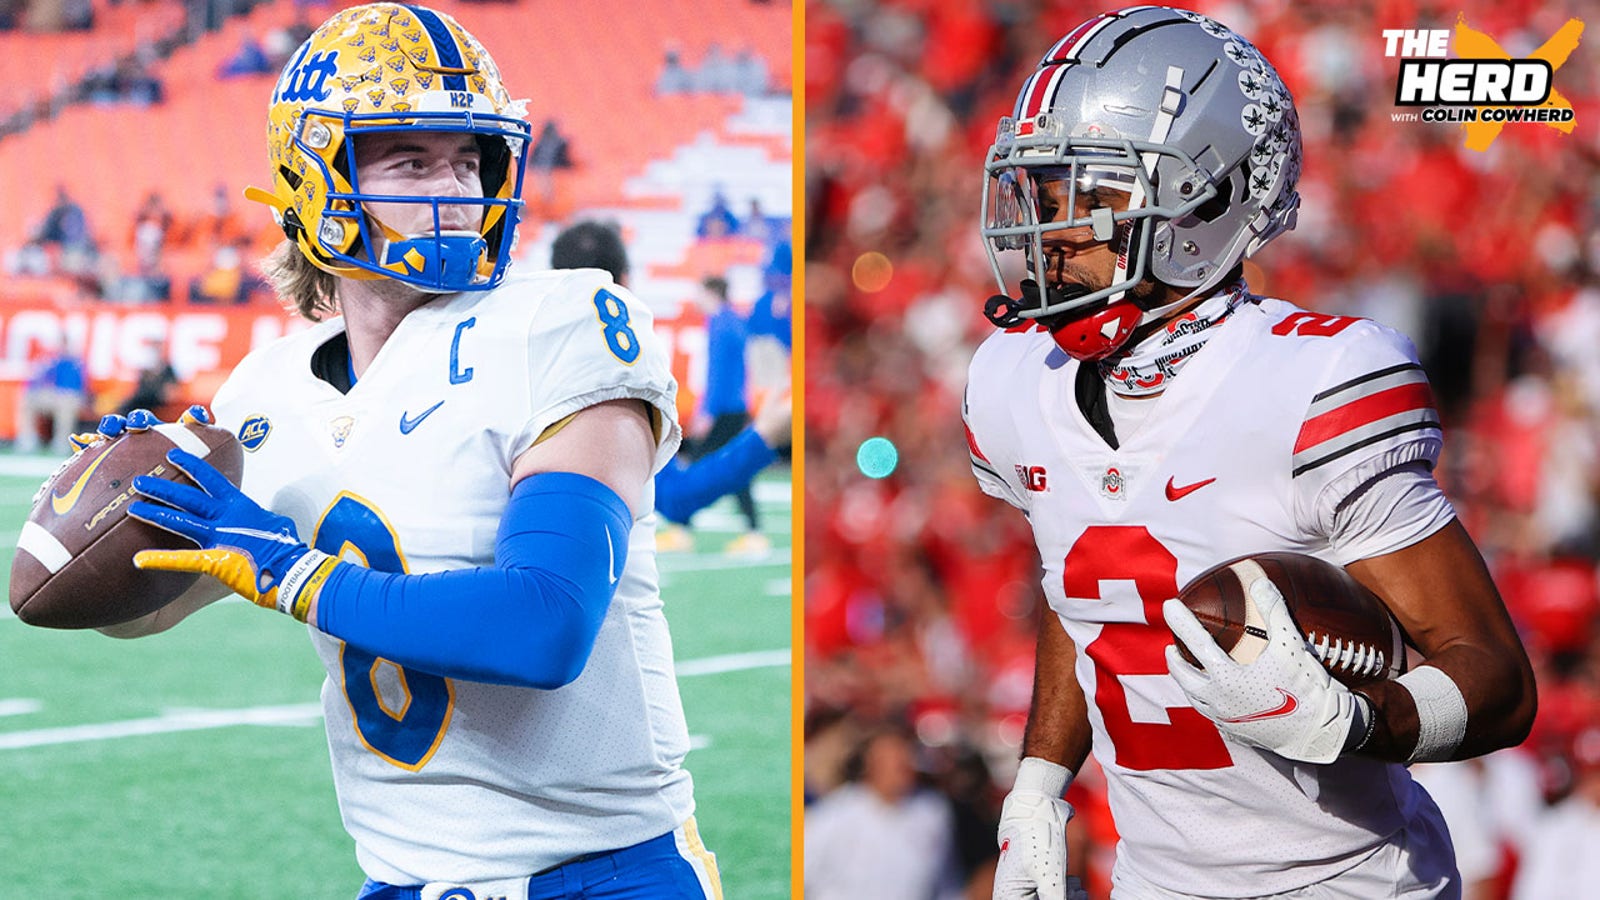 Top prospects to watch in the NFL Draft